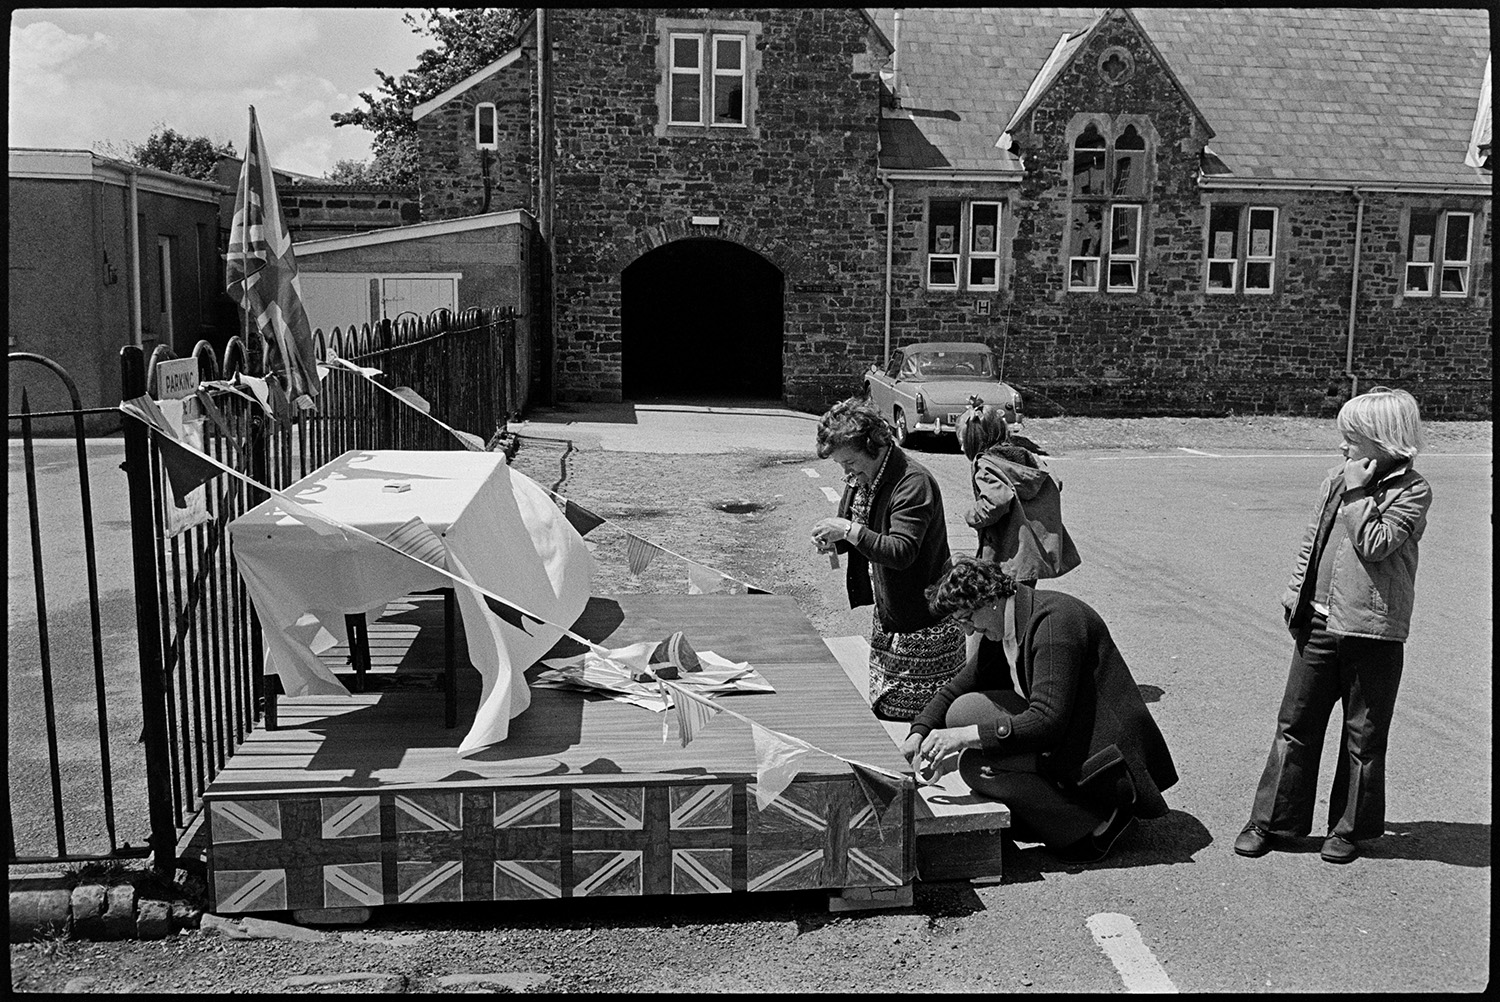 Dais and trestle tables being prepared for Jubilee Day. 
[Two women decorating a small platform and trestle table with bunting and Union Jack flags on the Silver Jubilee of Queen Elizabeth II in High Bickington. Two children are watching them.]